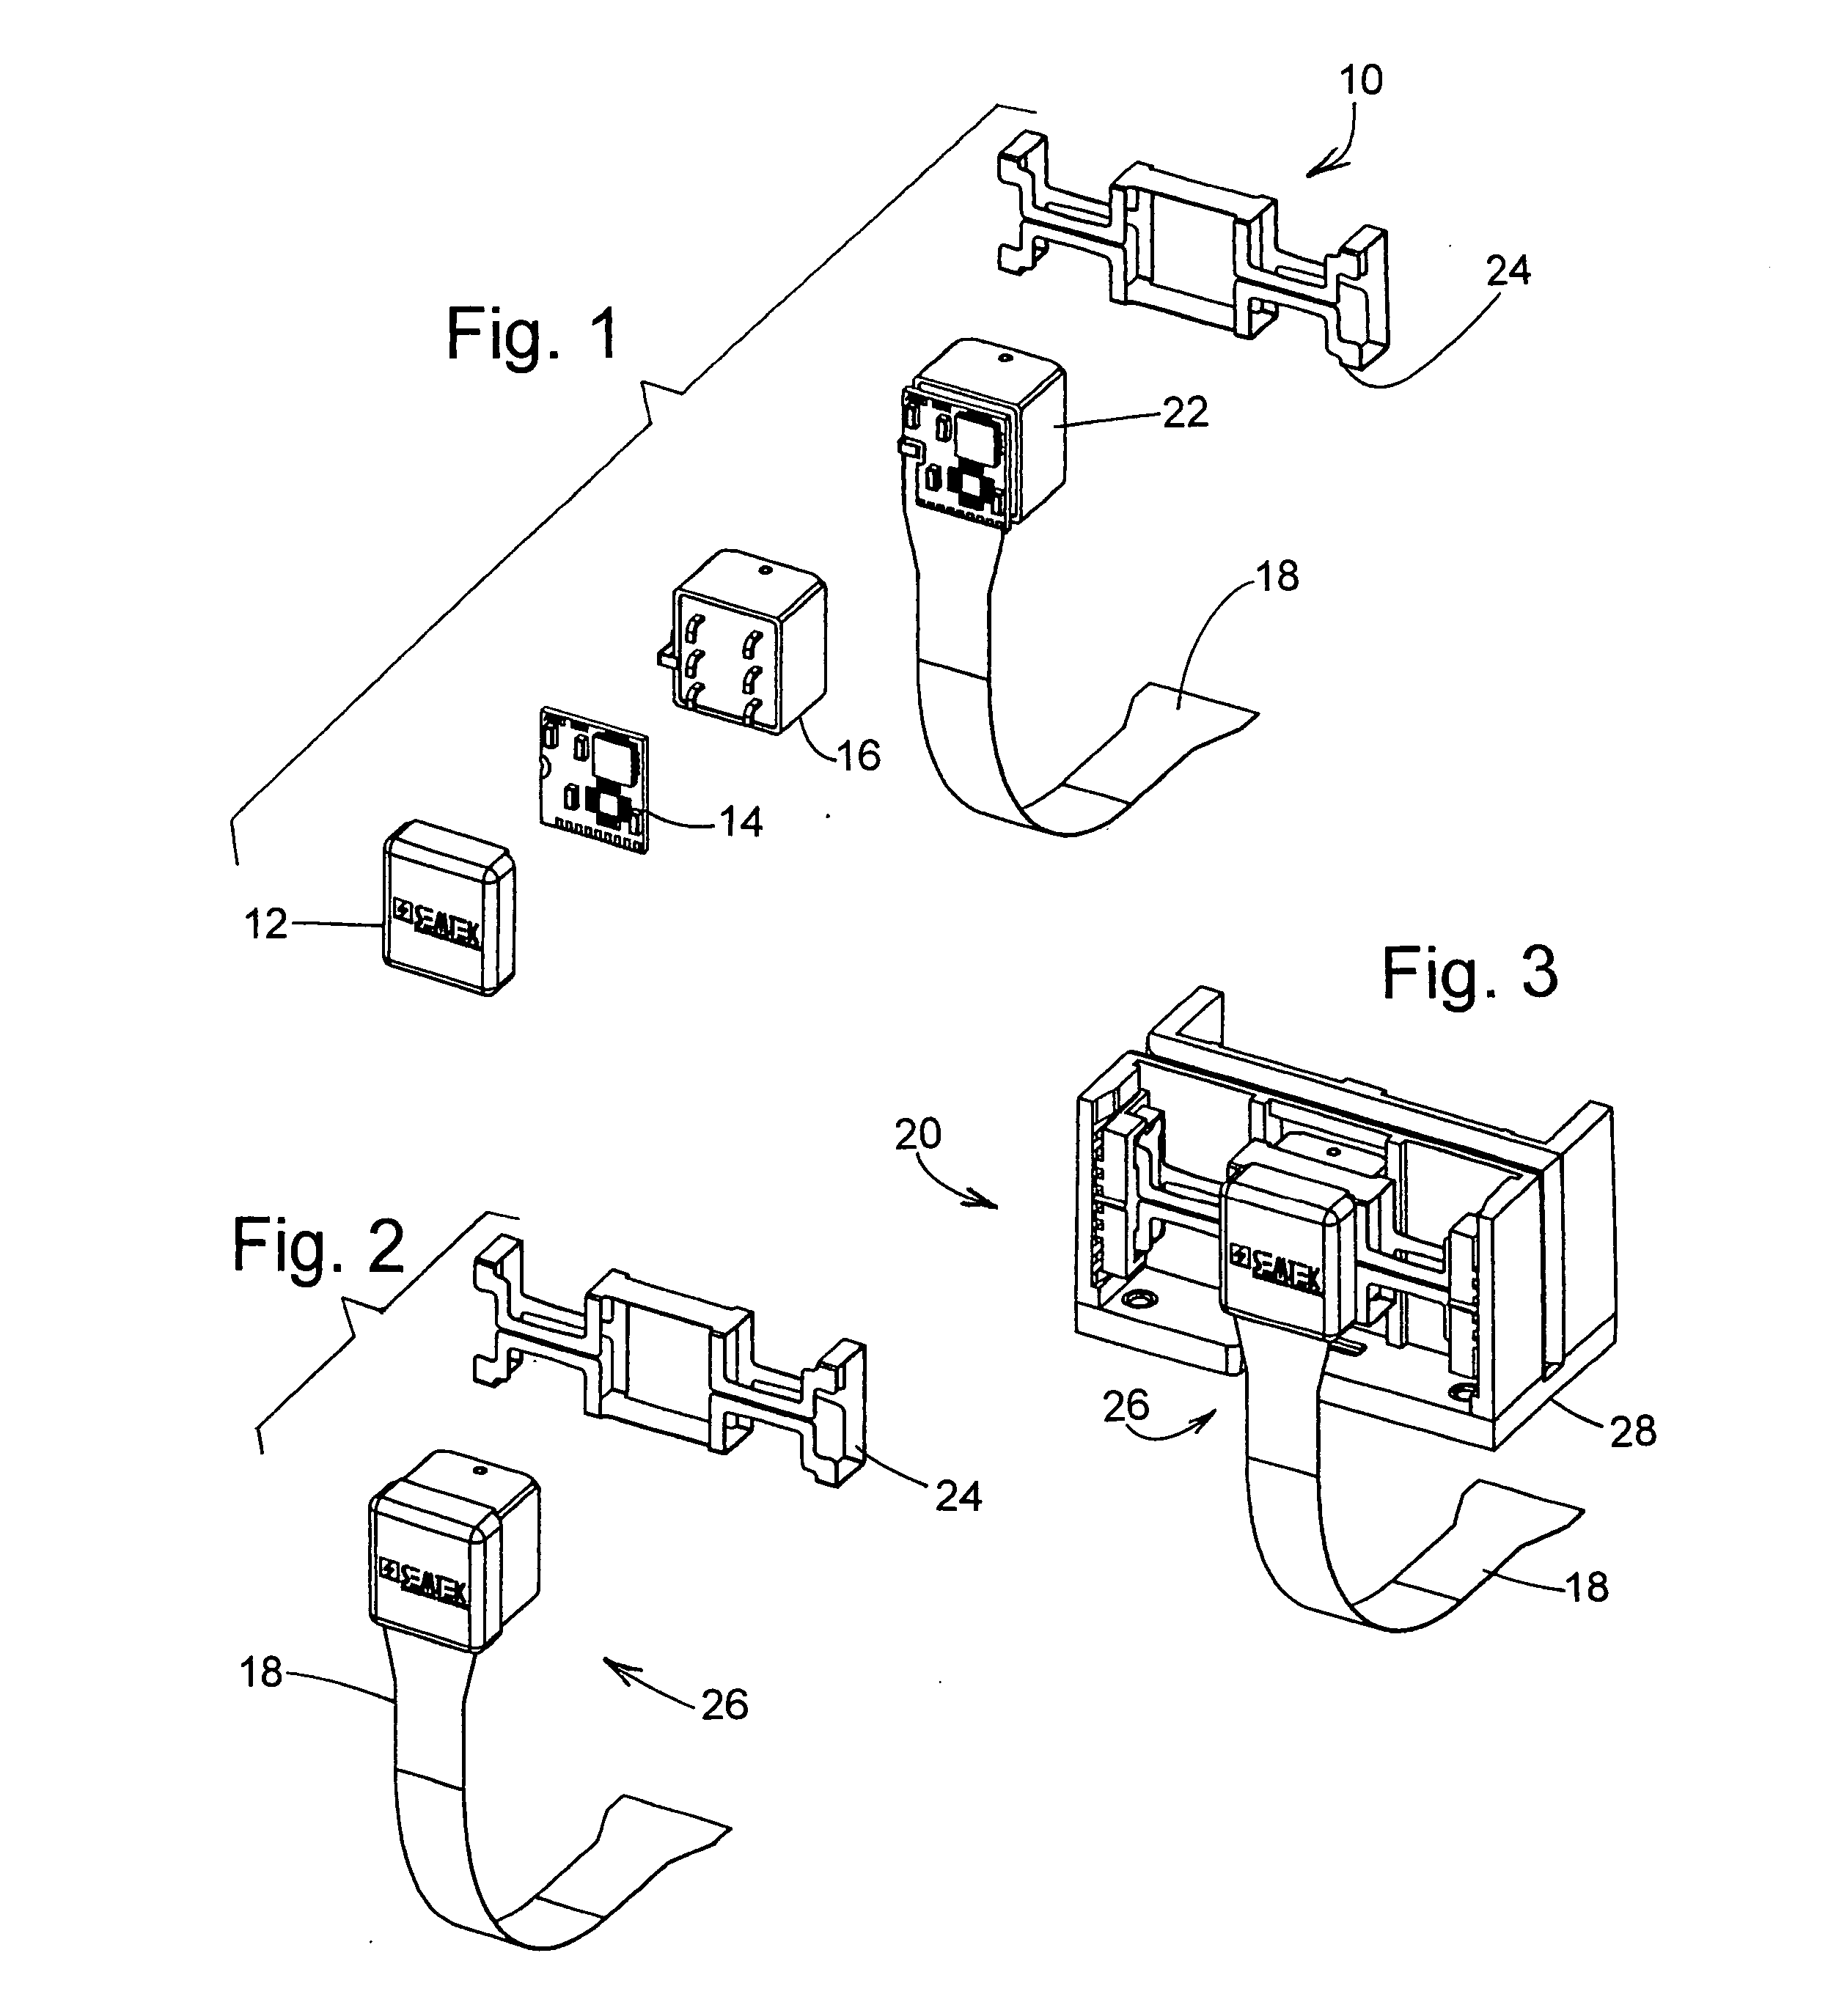 Secure magnetic stripe reader for handheld computing and method of using same